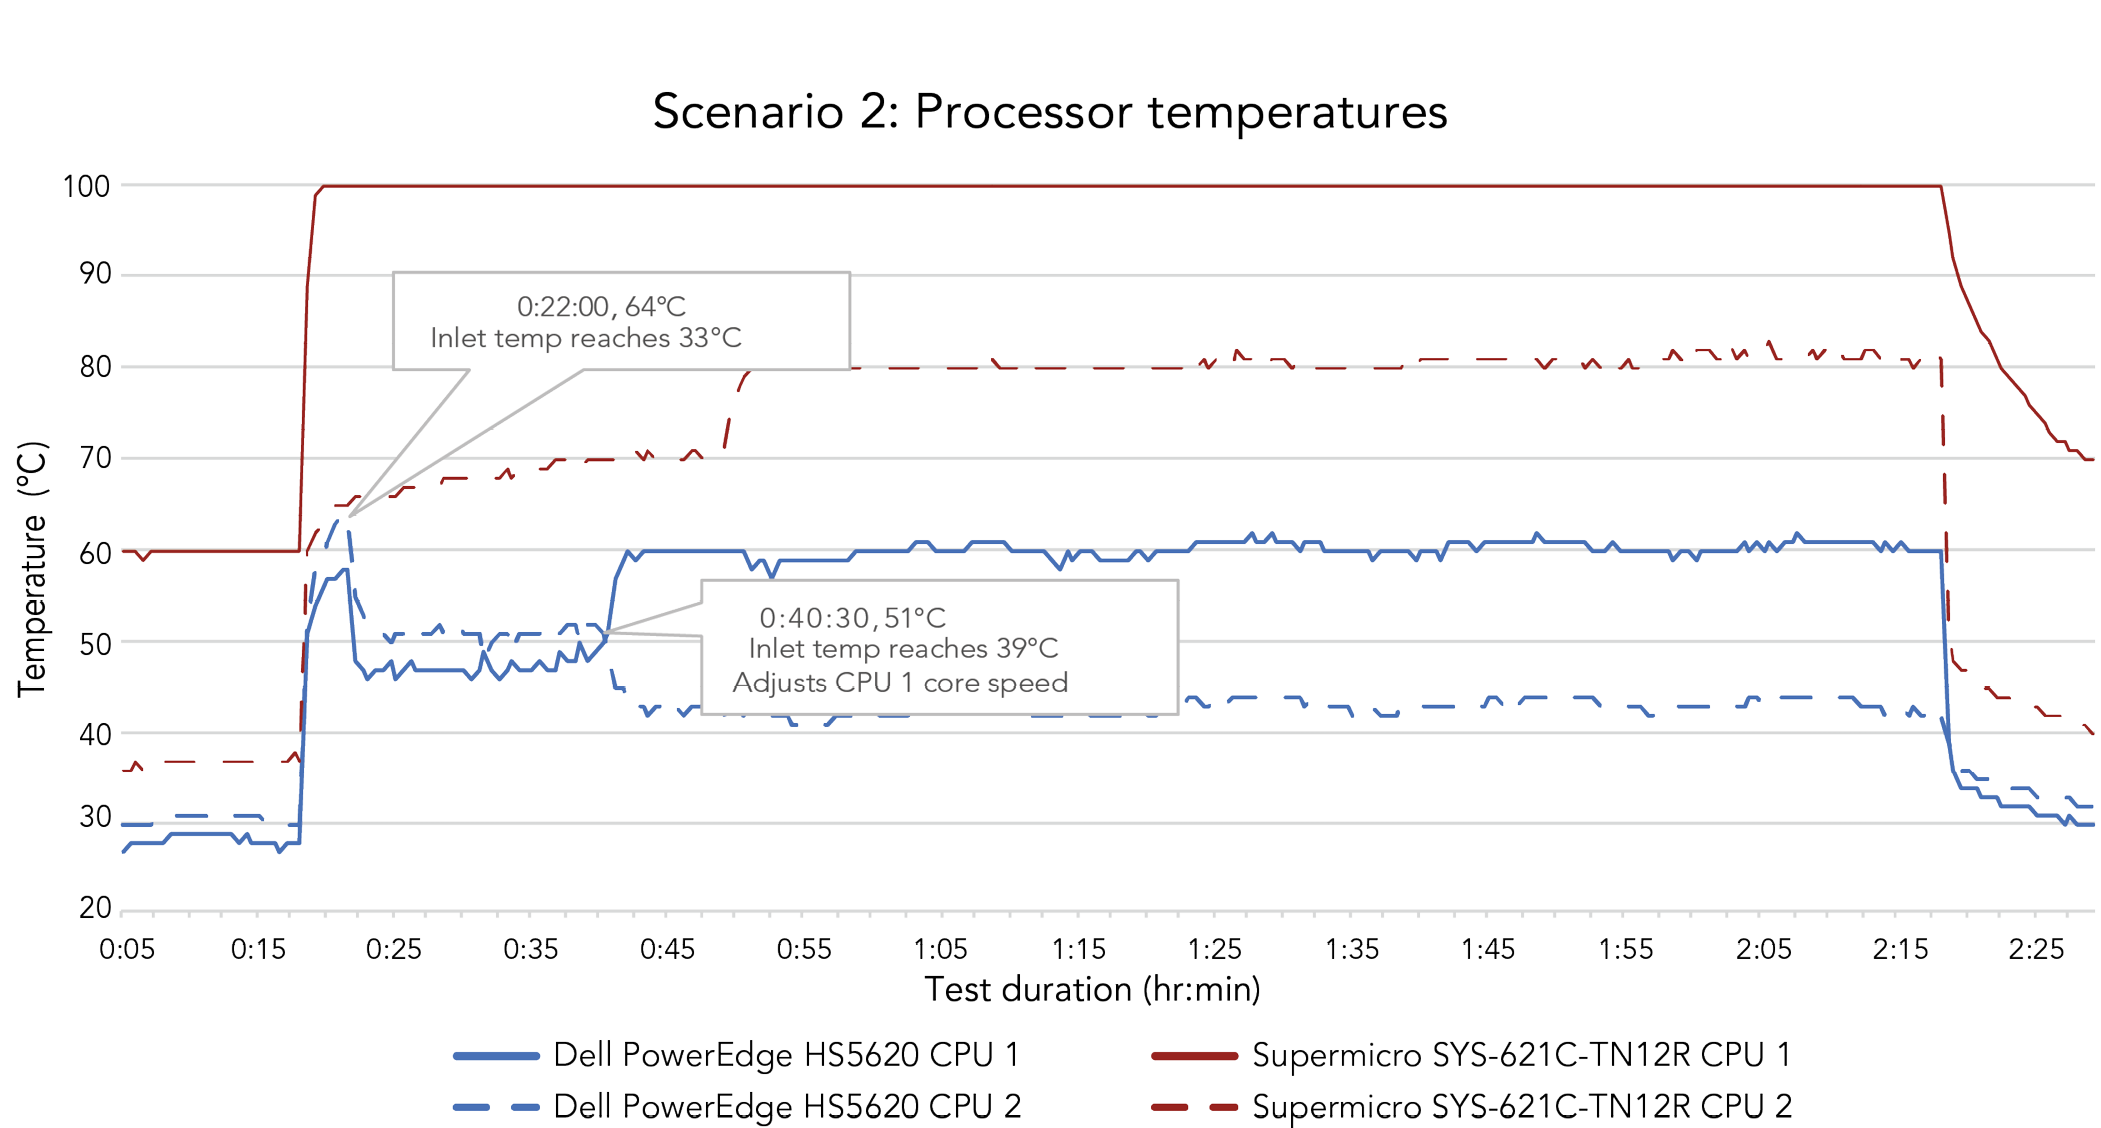 A line graph comparing each system’s processor temperatures over the course of the two-and-a-half-hour scenario 2 test, which includes an idle period 15 minutes before the workload began, the two-hour workload, and 15 minutes after the workload completed. The Dell PowerEdge HS5620 server’s two processors remained around 30°C before the workload and peaked at 64°C 22 minutes into the test, when the system’s inlet temperature reached 33°C. When the inlet temperature reached 39°C at 40 minutes and 30 seconds into the test—when the CPUs measured at around 51°C—the Dell system adjusted the core speed of one of the processors. This processor remained around 60°C throughout the workload and dropped down to around 30°C after completing the two-hour workload. The other processor remained under 45°C for the majority of the workload, and also dropped to around 30°C after completing the workload. In the Supermicro SYS‑621C-TN12R server, one of the processors started at 60°C, then rose to 100°C throughout the entirety of the workload. After it completed the workload, its temperature dropped to about 70°C. Its other processor started at just over 35°C, rose to about 65°C when the test began, and climbed to about 80°C at 50 minutes into the test. It stayed around the 80°C mark throughout the majority of the workload before dropping to around 40°C after completing the workload.